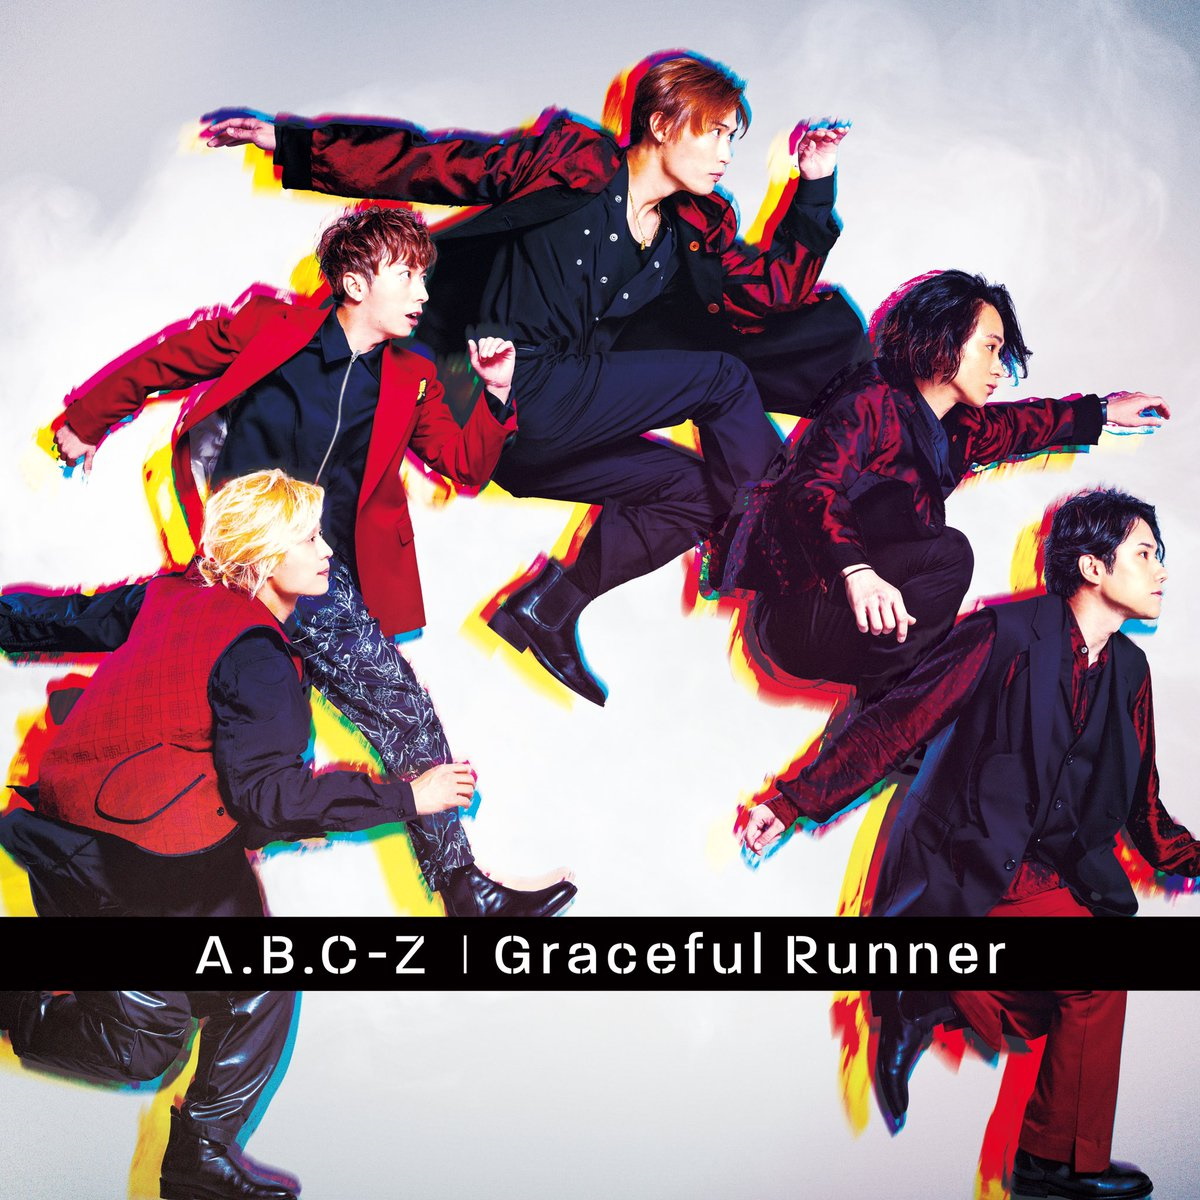 Cover art for『A.B.C-Z - Enamel Slow』from the release『Graceful Runner